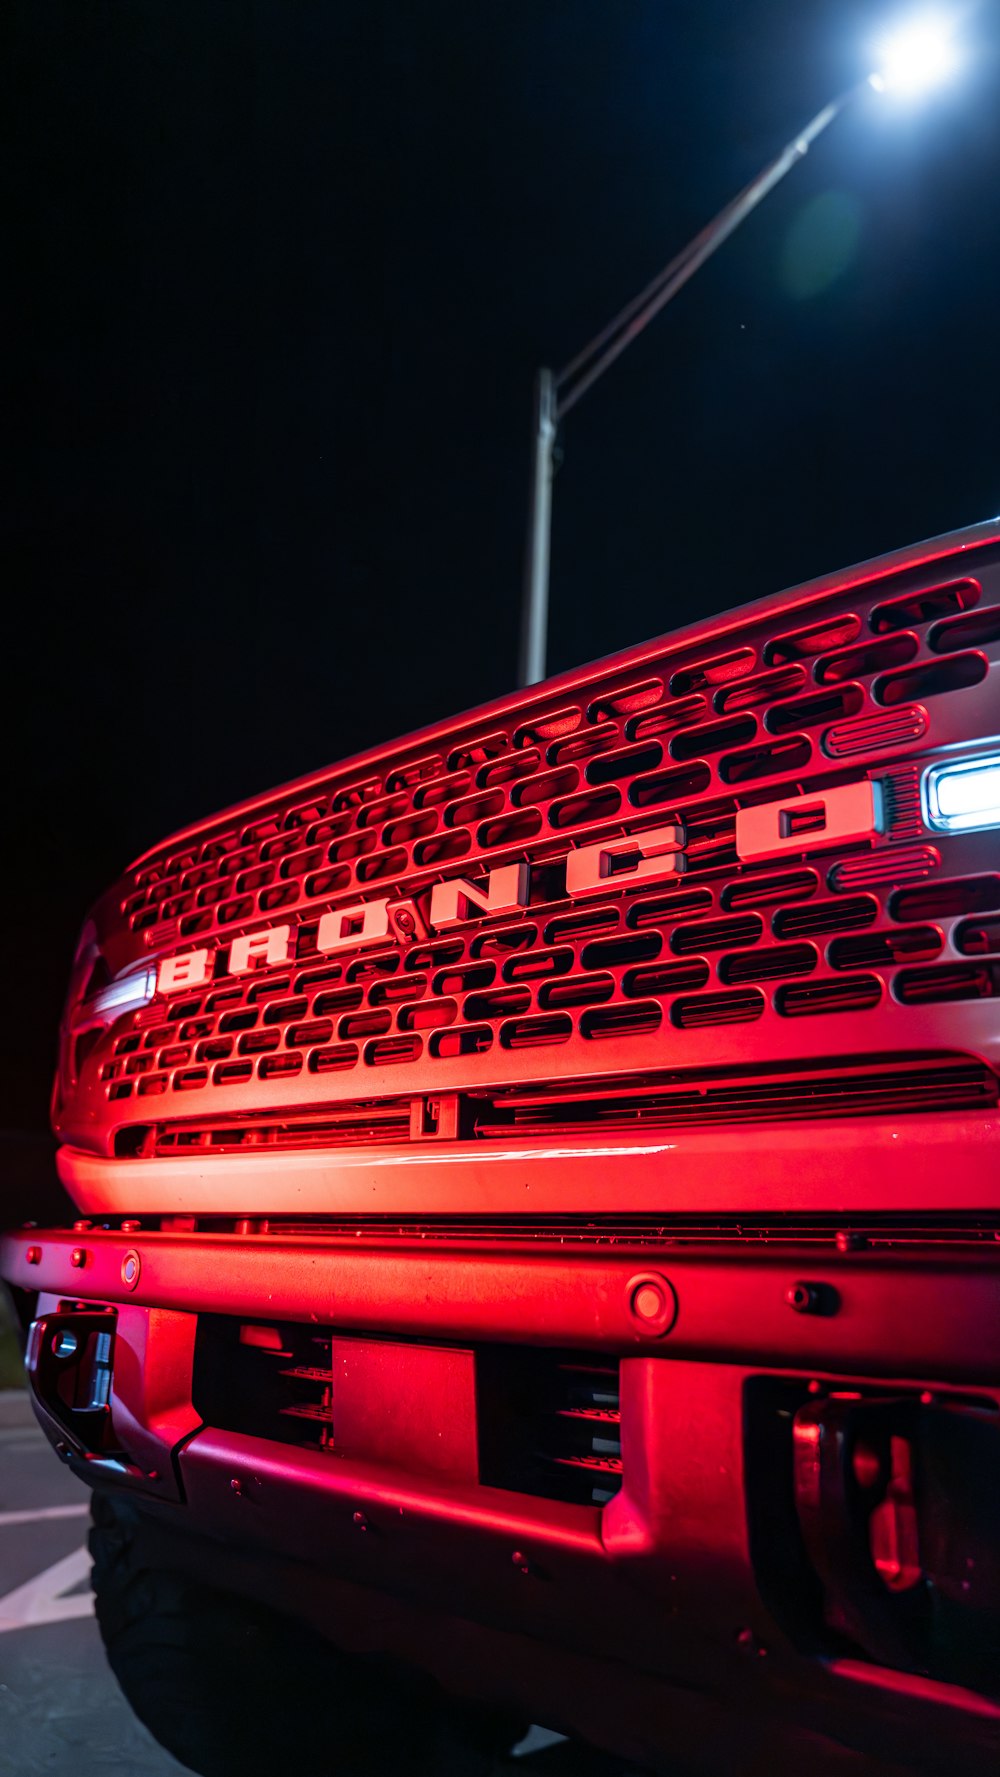 a red truck parked in a parking lot at night